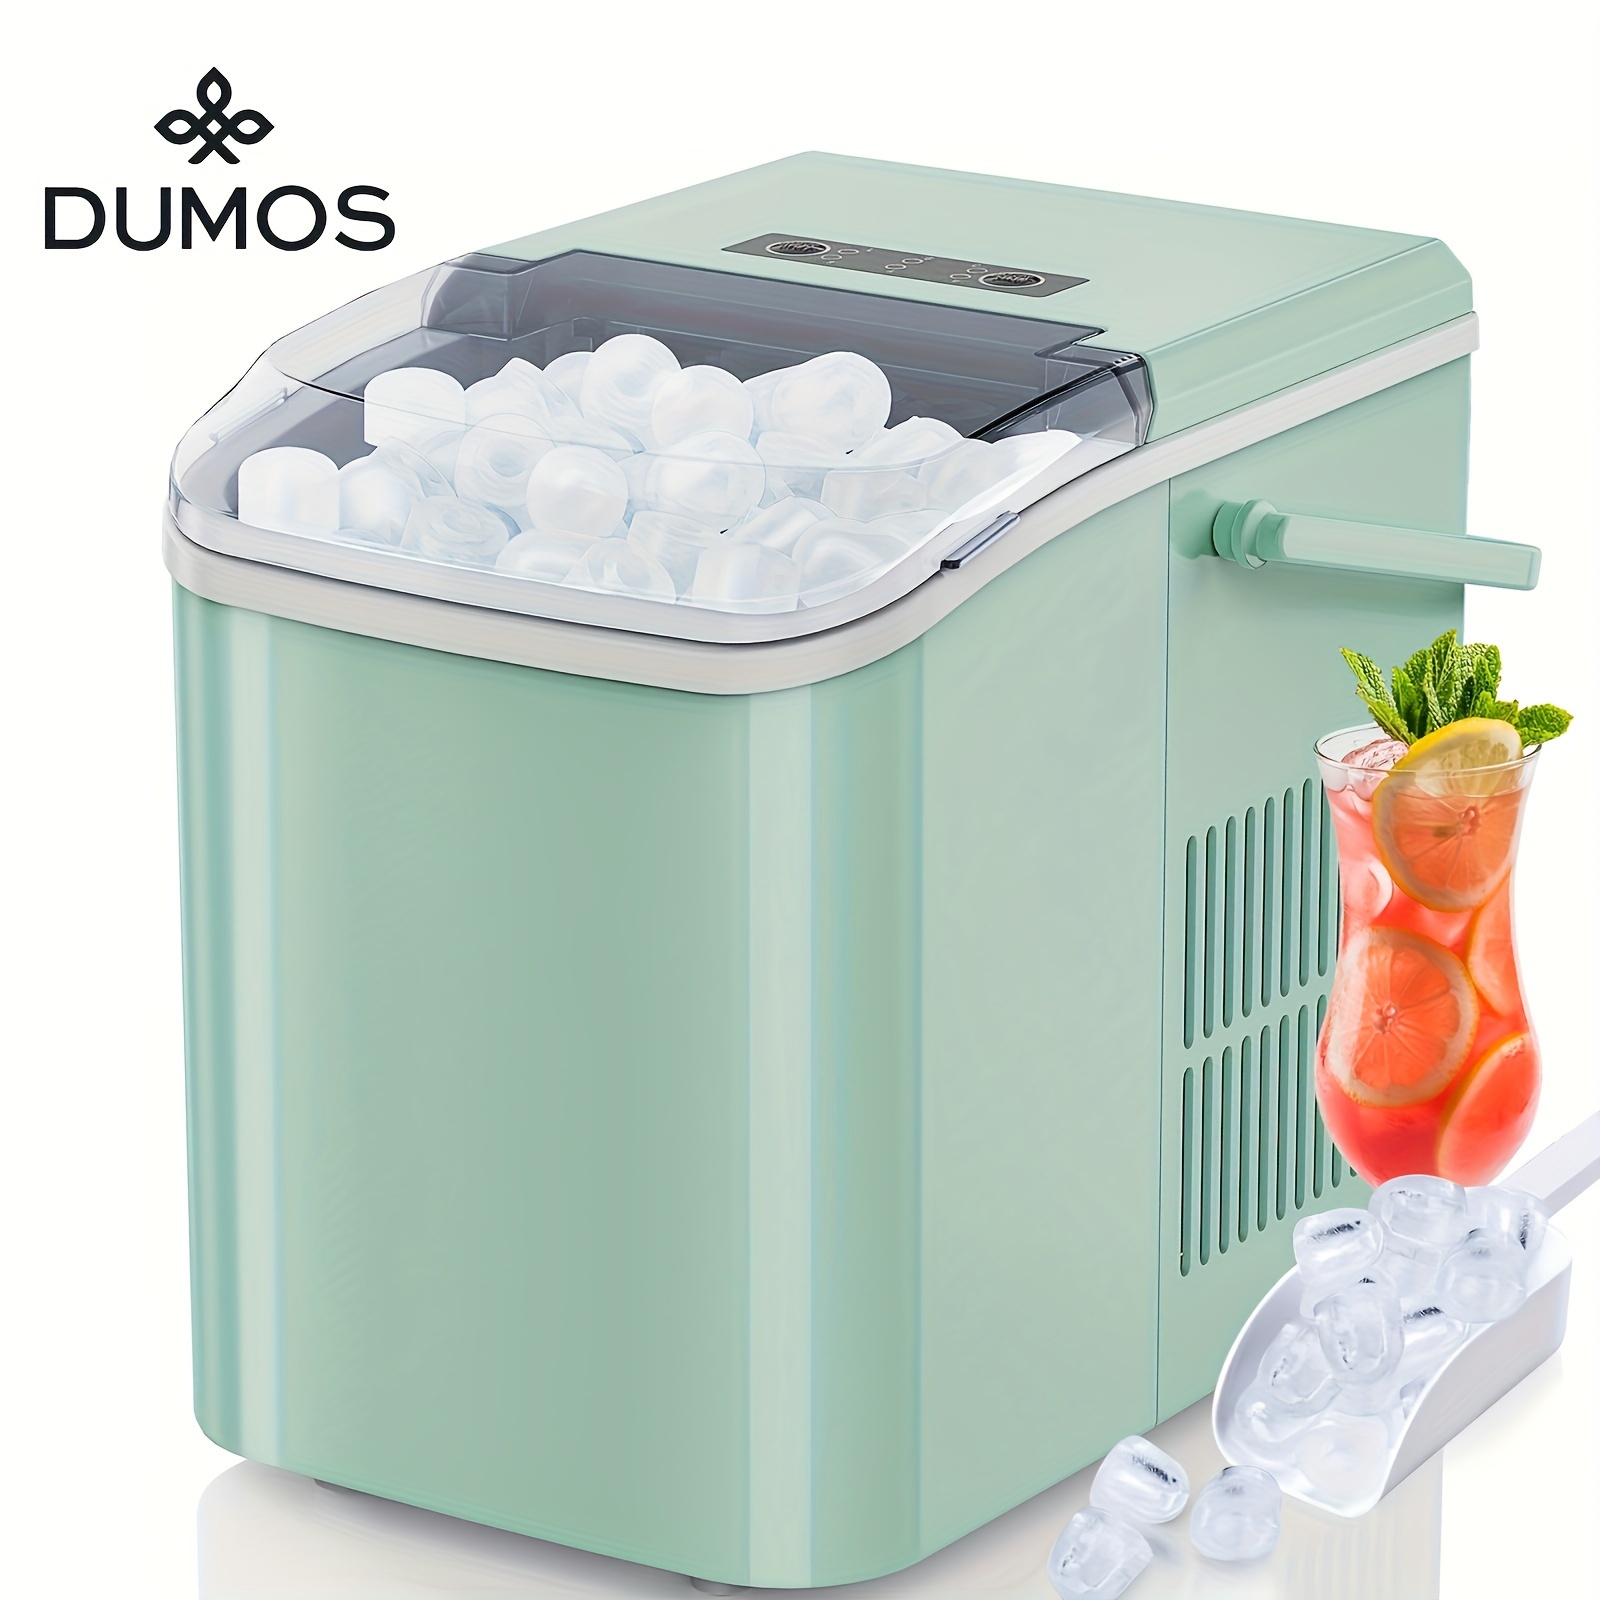 

Dumos Portable Outdoor Ice Maker Countertop Low Noise One-touch Operation, Effective Ice Making Creates 26lbs Ice In , Portable Self-cleaning Function Ice Machine